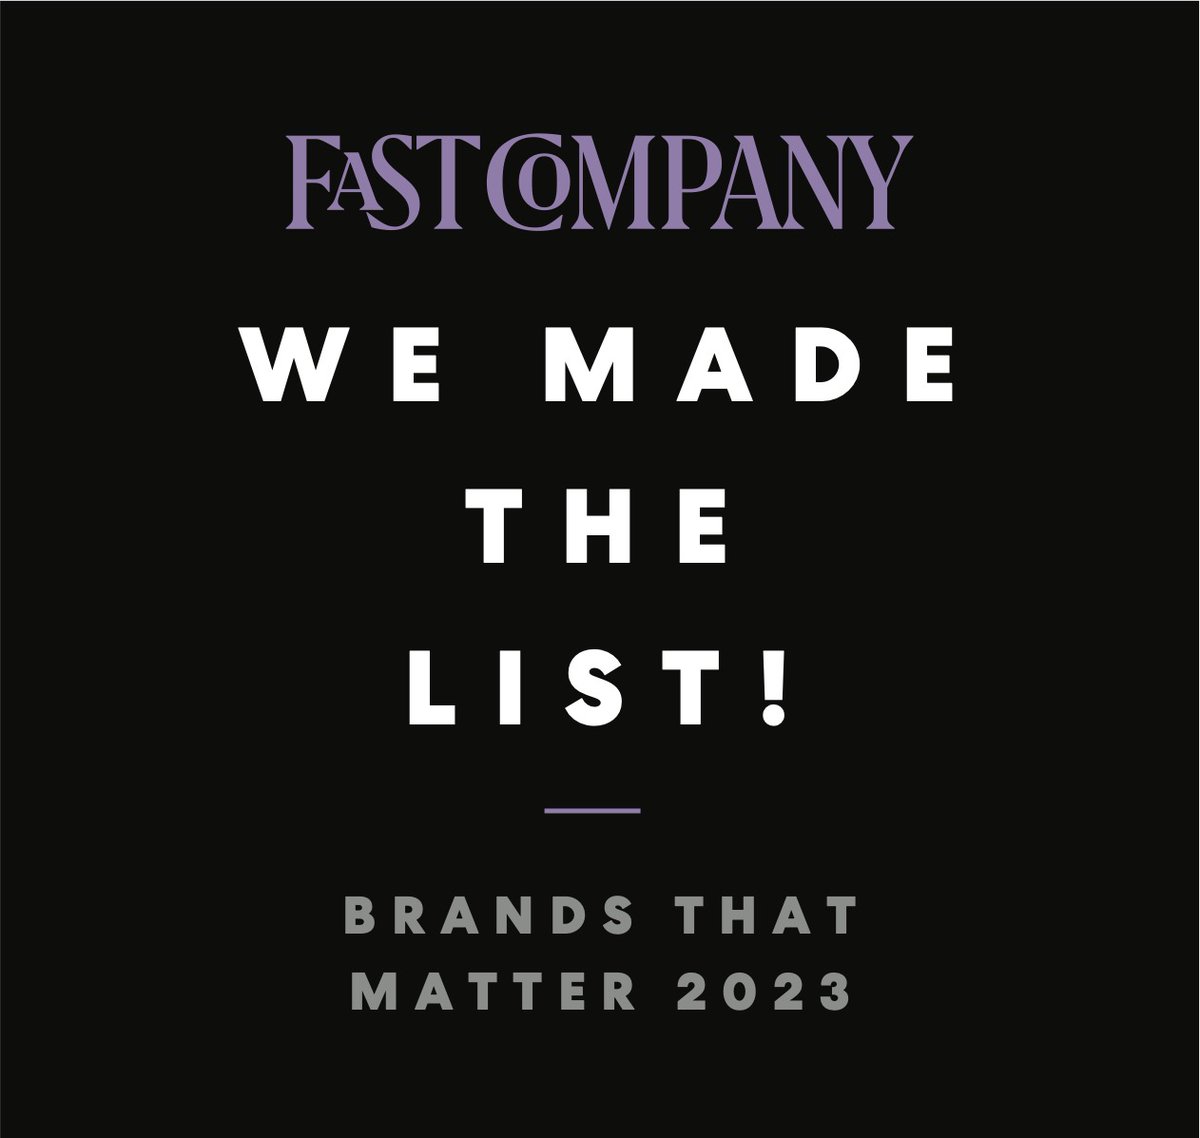 Excited to share @Webex has been named as a honoree in @FastCompany ’s Brands That Matter Workplace category, recognized for helping empower women-led businesses.

See more ➡️ cs.co/6010uMIbi

#FCBrandAwards